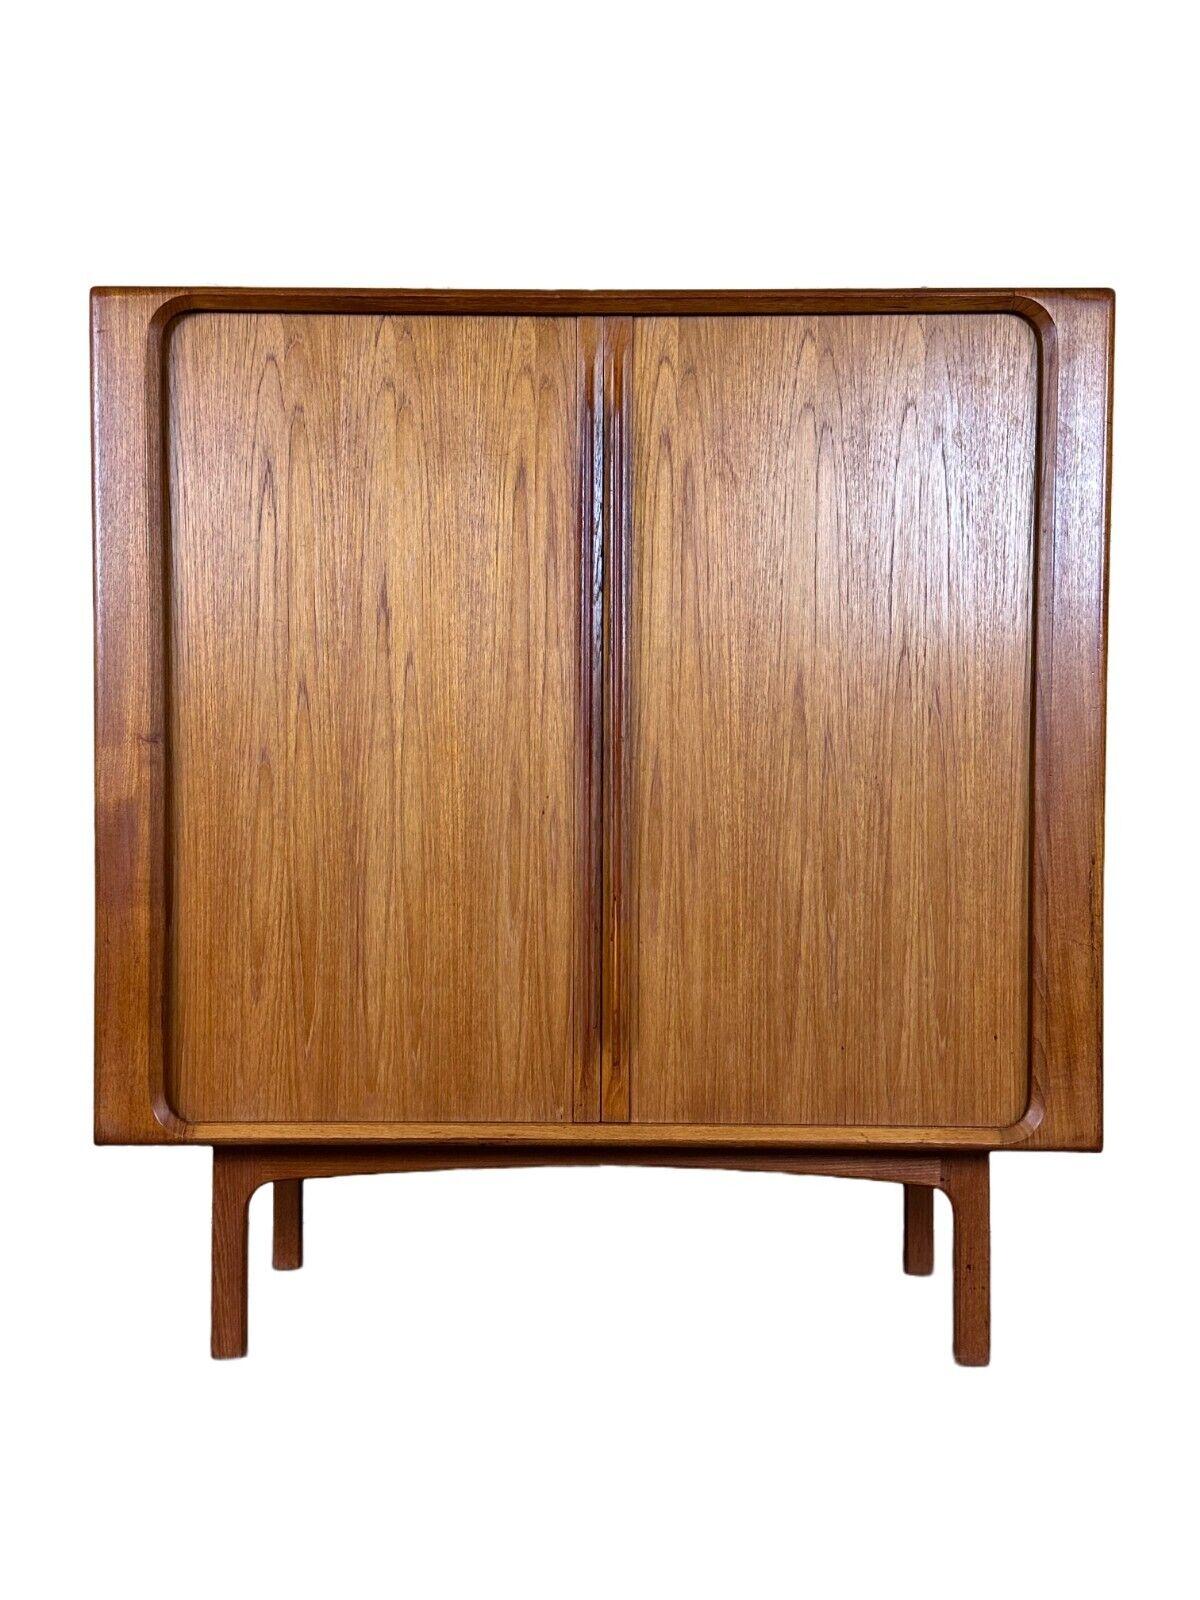 60s 70s teak sideboard highboard Bernhard Pedersen & Son Danish Design

Object: sideboard

Manufacturer: BPS

Condition: good

Age: around 1960-1970

Dimensions:

Width = 120.5cm
Depth = 48.5cm
Height = 129cm

Other notes:

The pictures serve as